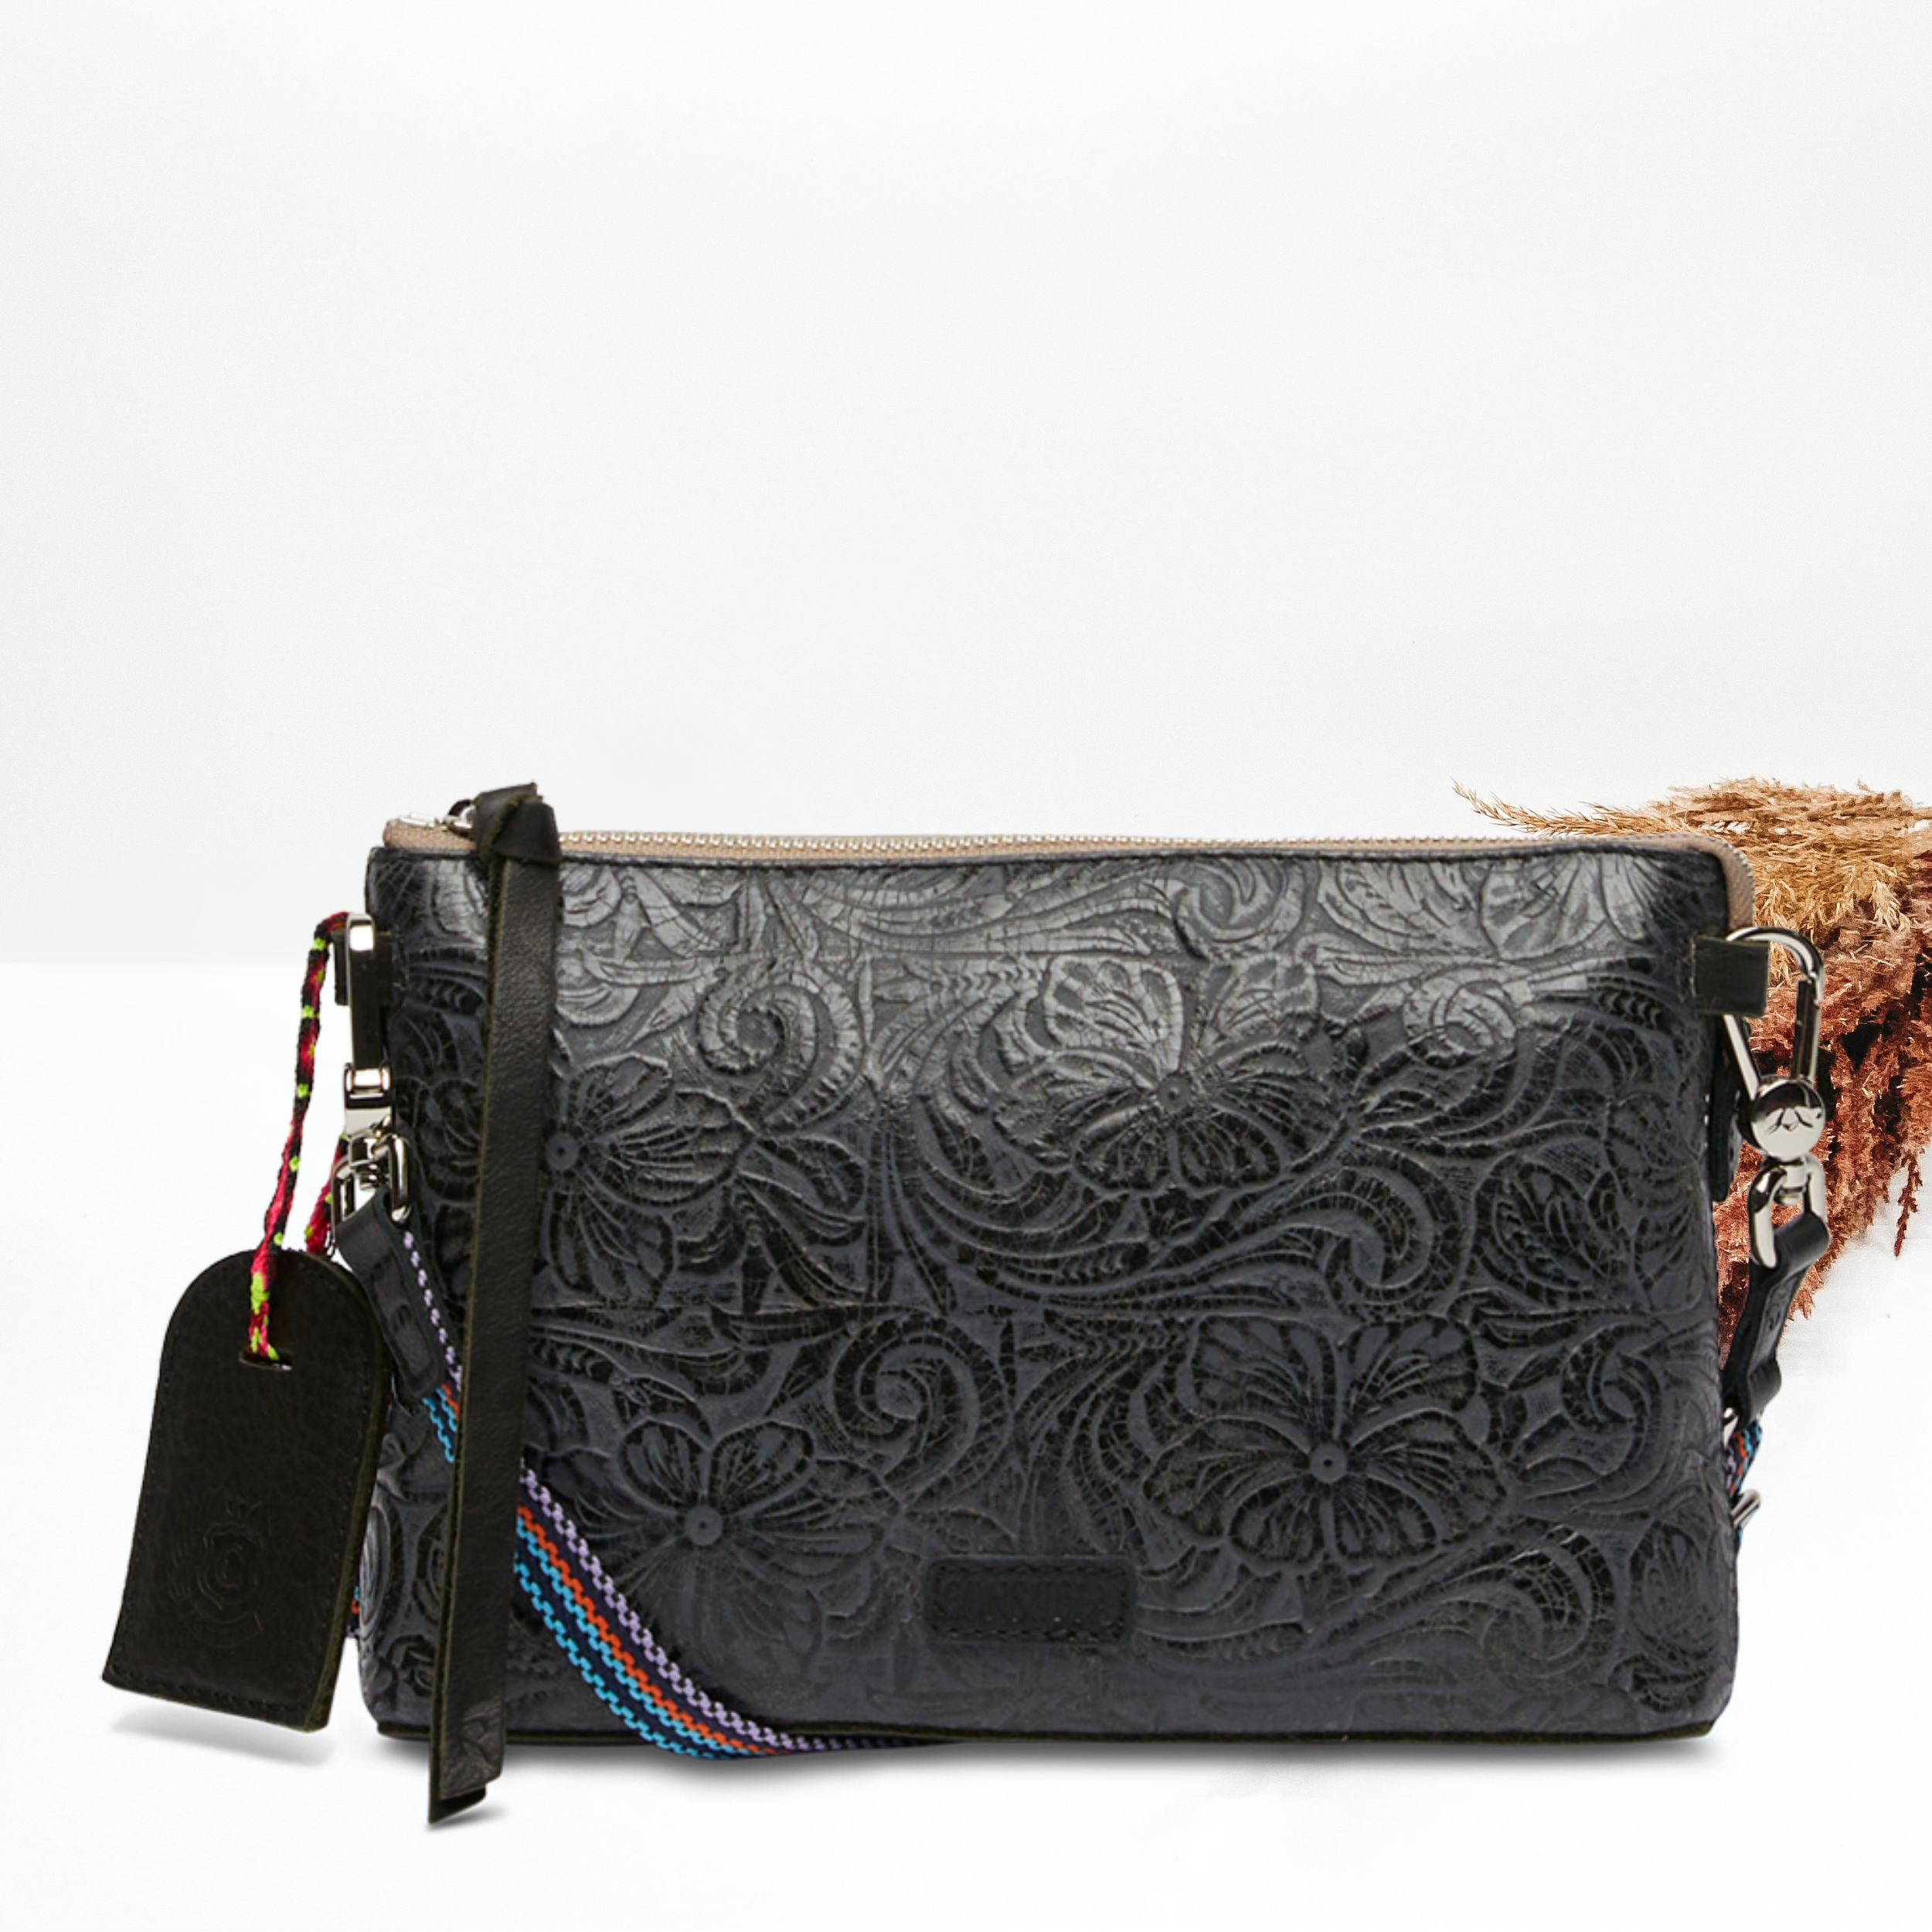 Pictured on a white background is an midtown corssbody purse with a black leather wristlet strap and a woven crossbody strap. This purse has a white with a black leather tooled print.